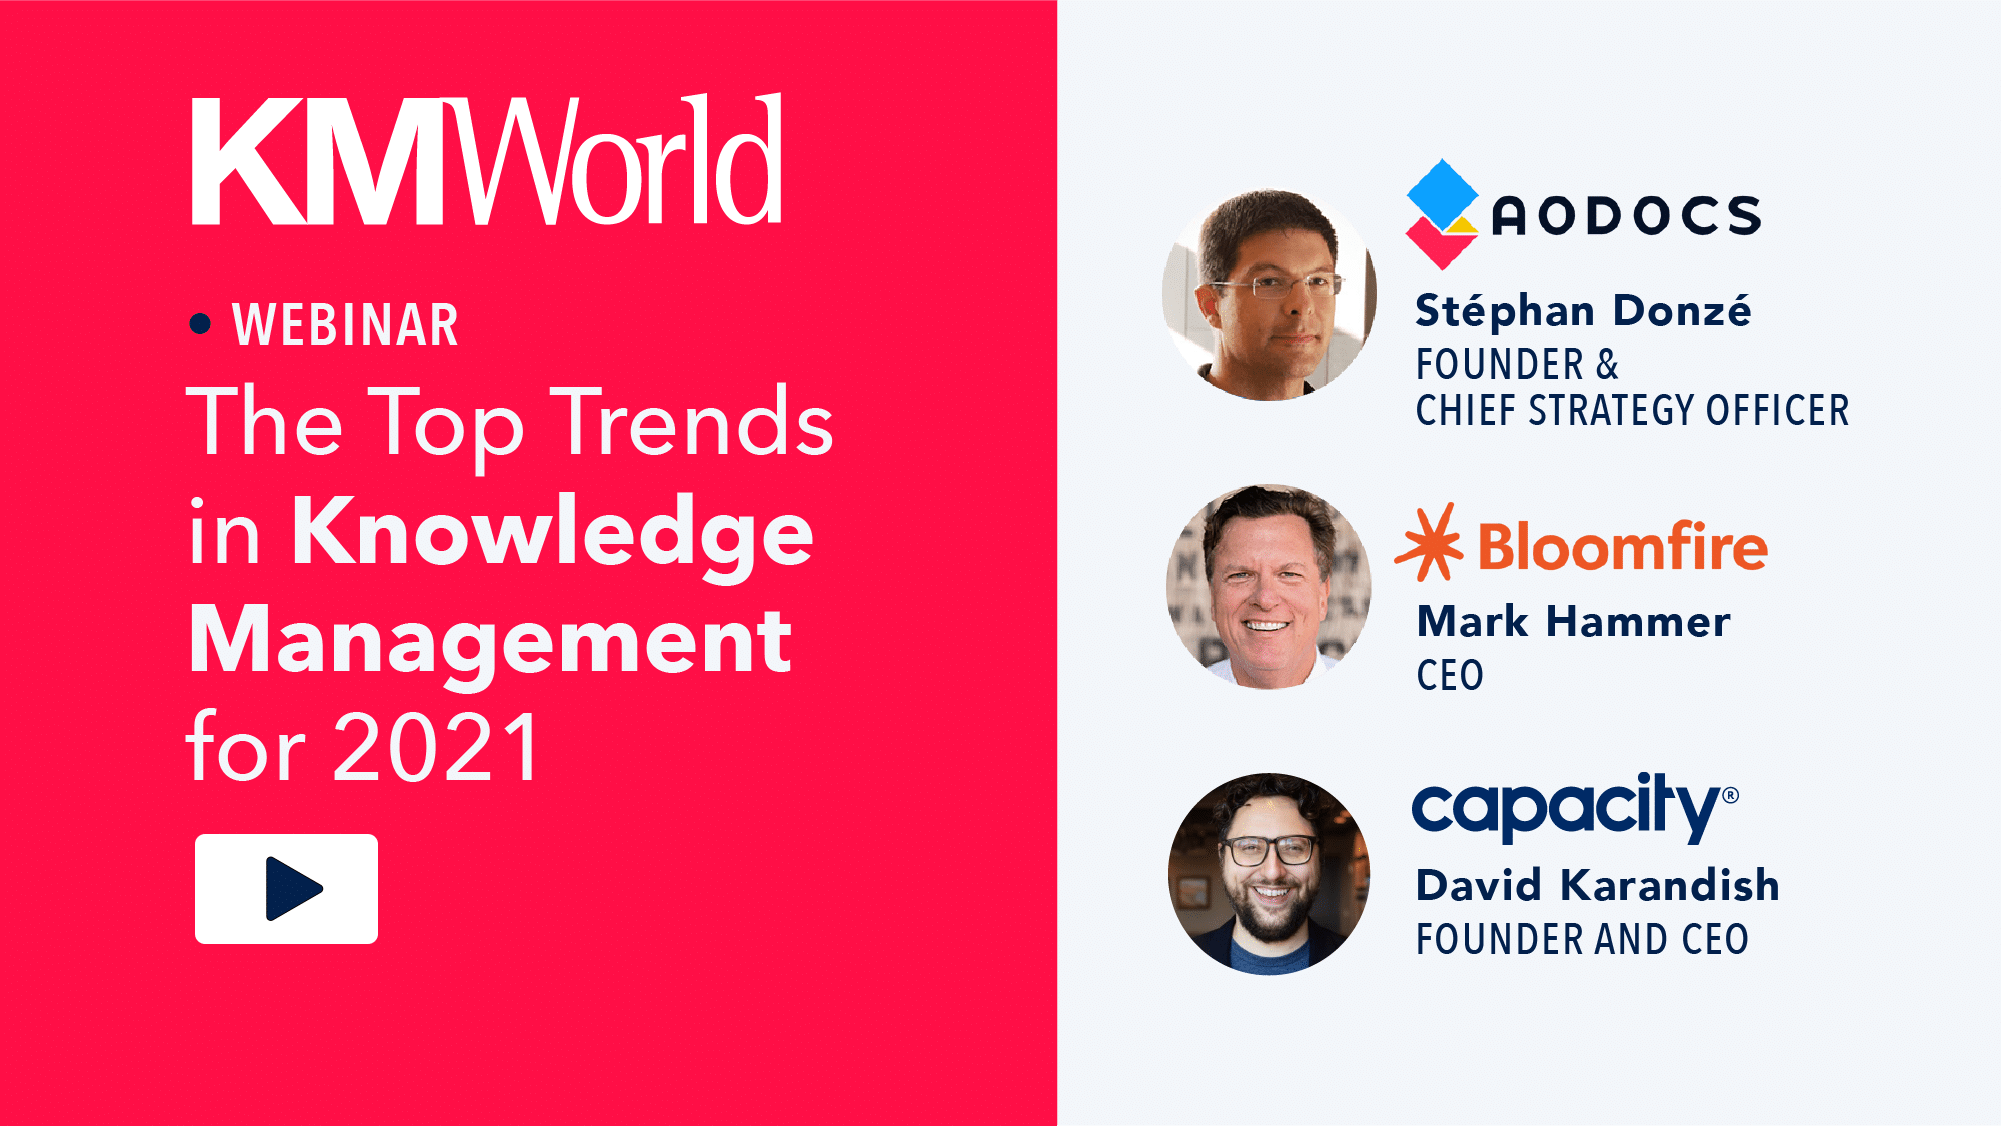 The Top Trends in Knowledge Management for 2021